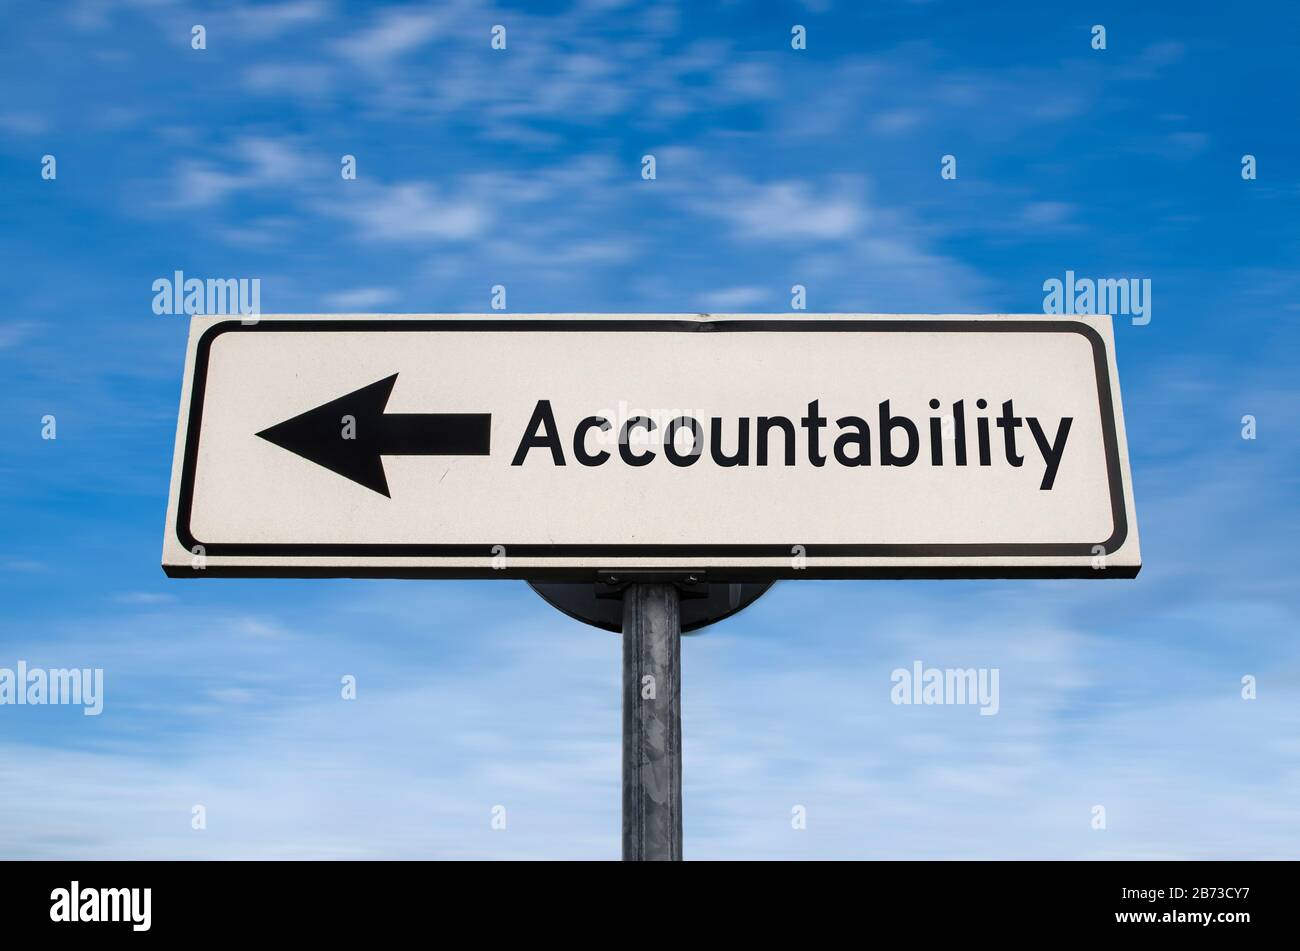 Accountability road sign, arrow on blue sky background. One way blank road sign with copy space. Arrow on a pole pointing in one direction. Stock Photo